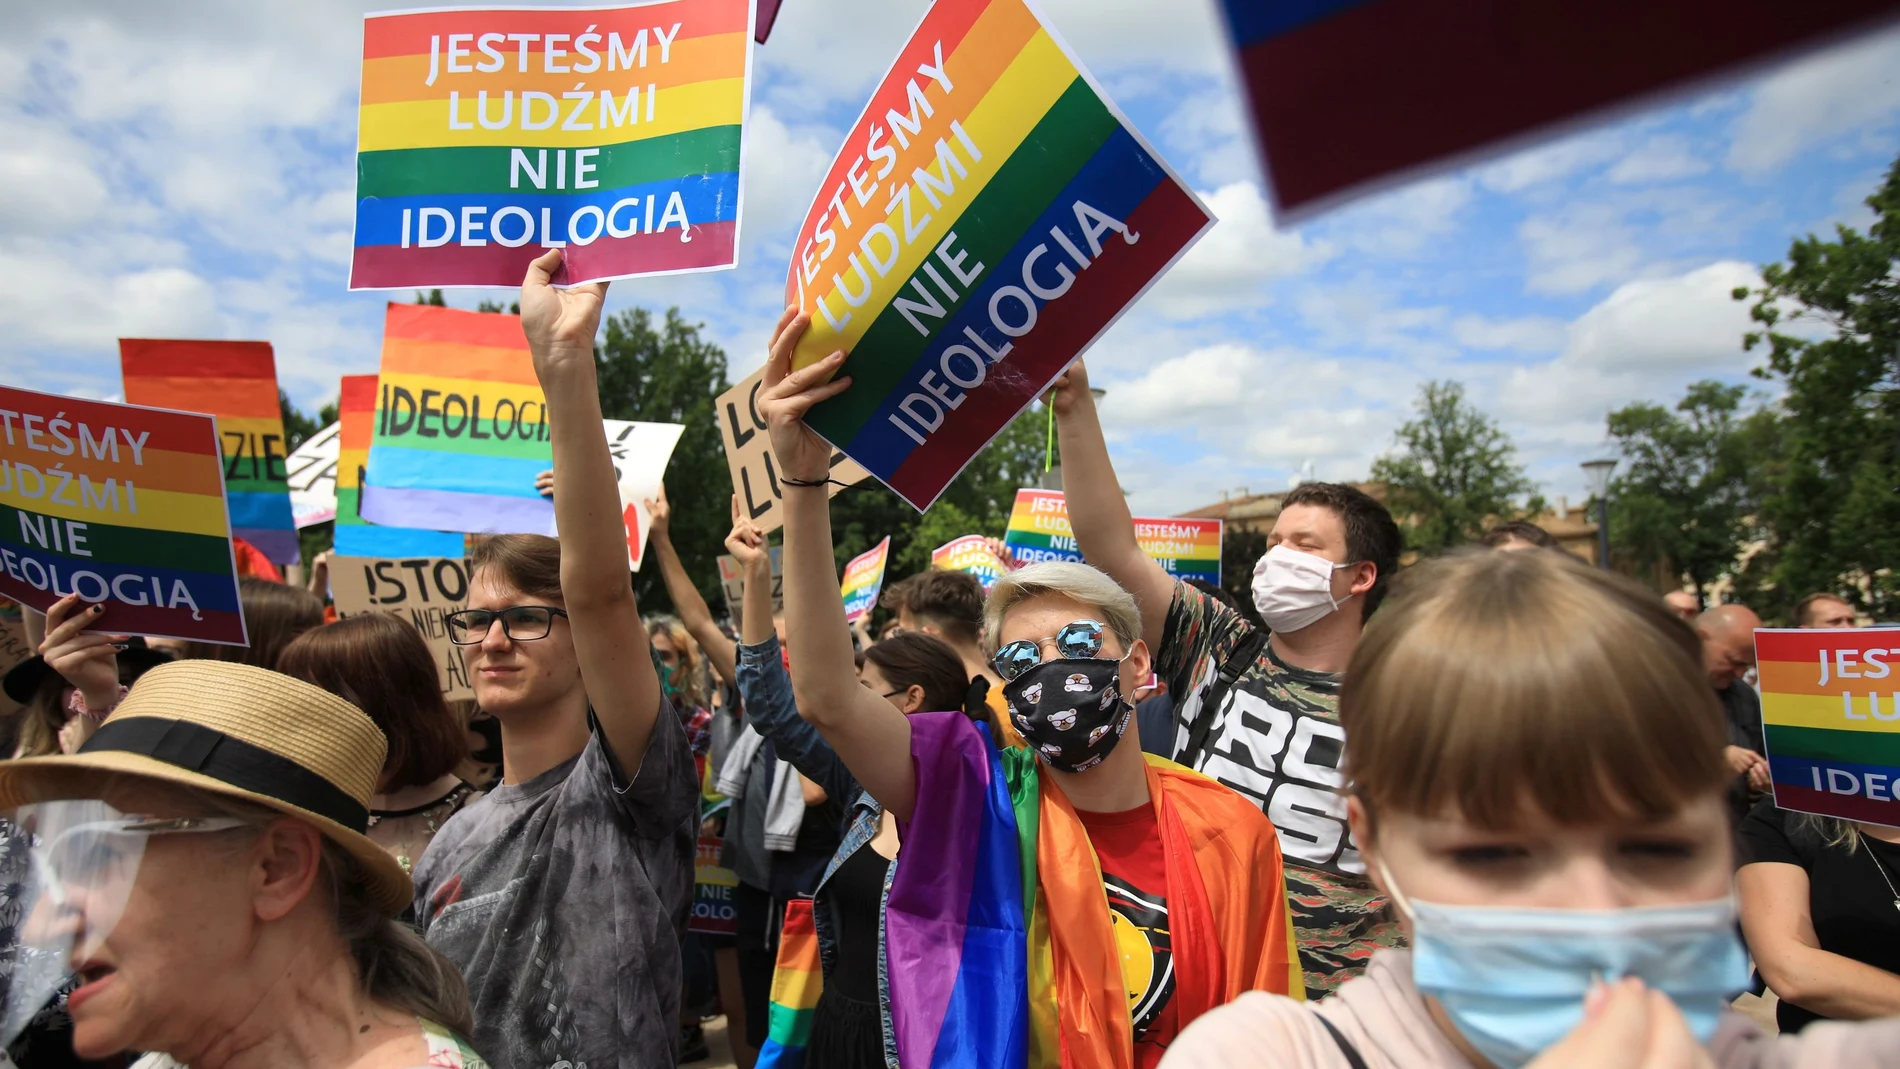 People protest against Polish President Andrzej Duda recent LGBT comments during his election rally in Lublin